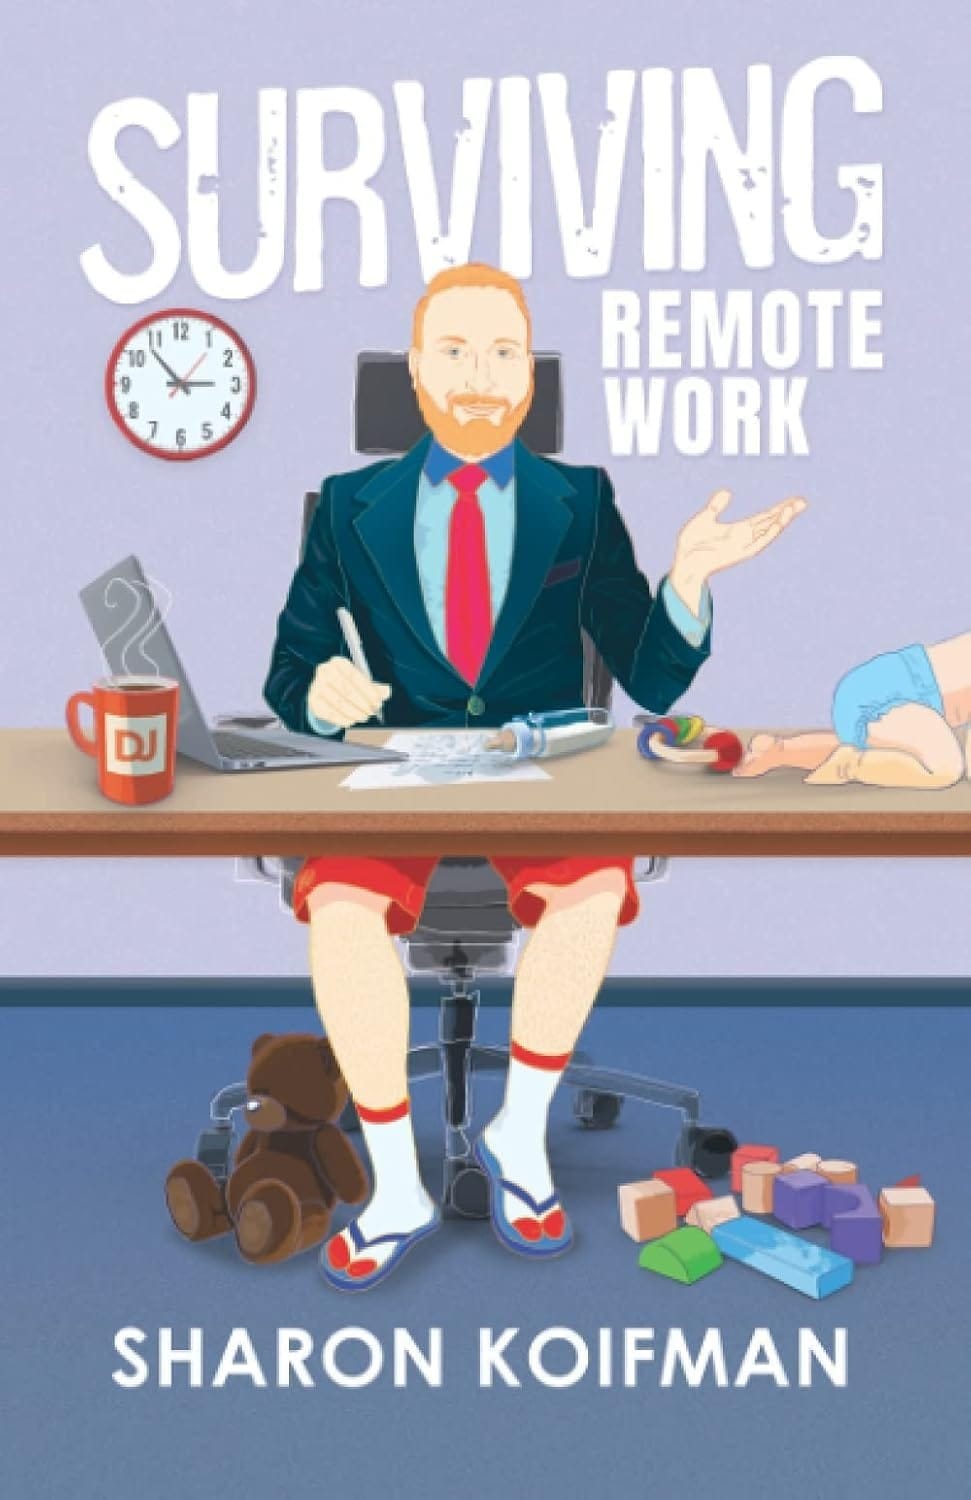 10 Books to Develop Essential Skills for Working from Home